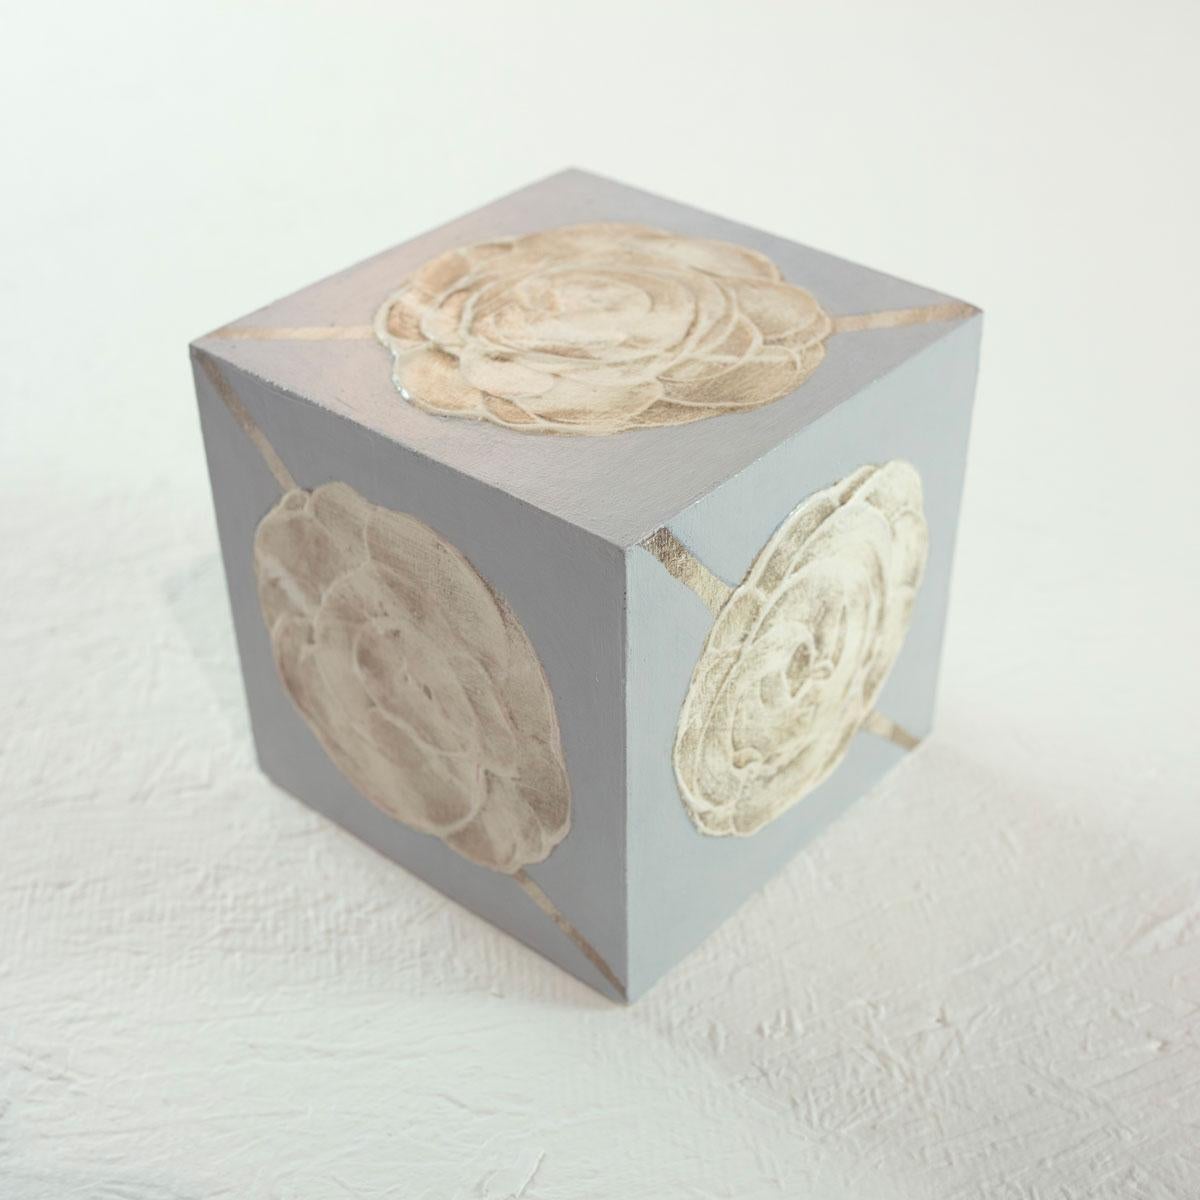 This 5" hand-painted sculptural cube by Sofie Swann is made with acrylic paint and gesso on wood. It features light texture and a warm neutral plaette, with a grey background and a large sandy beige abstracted floral form on each face of the cube.